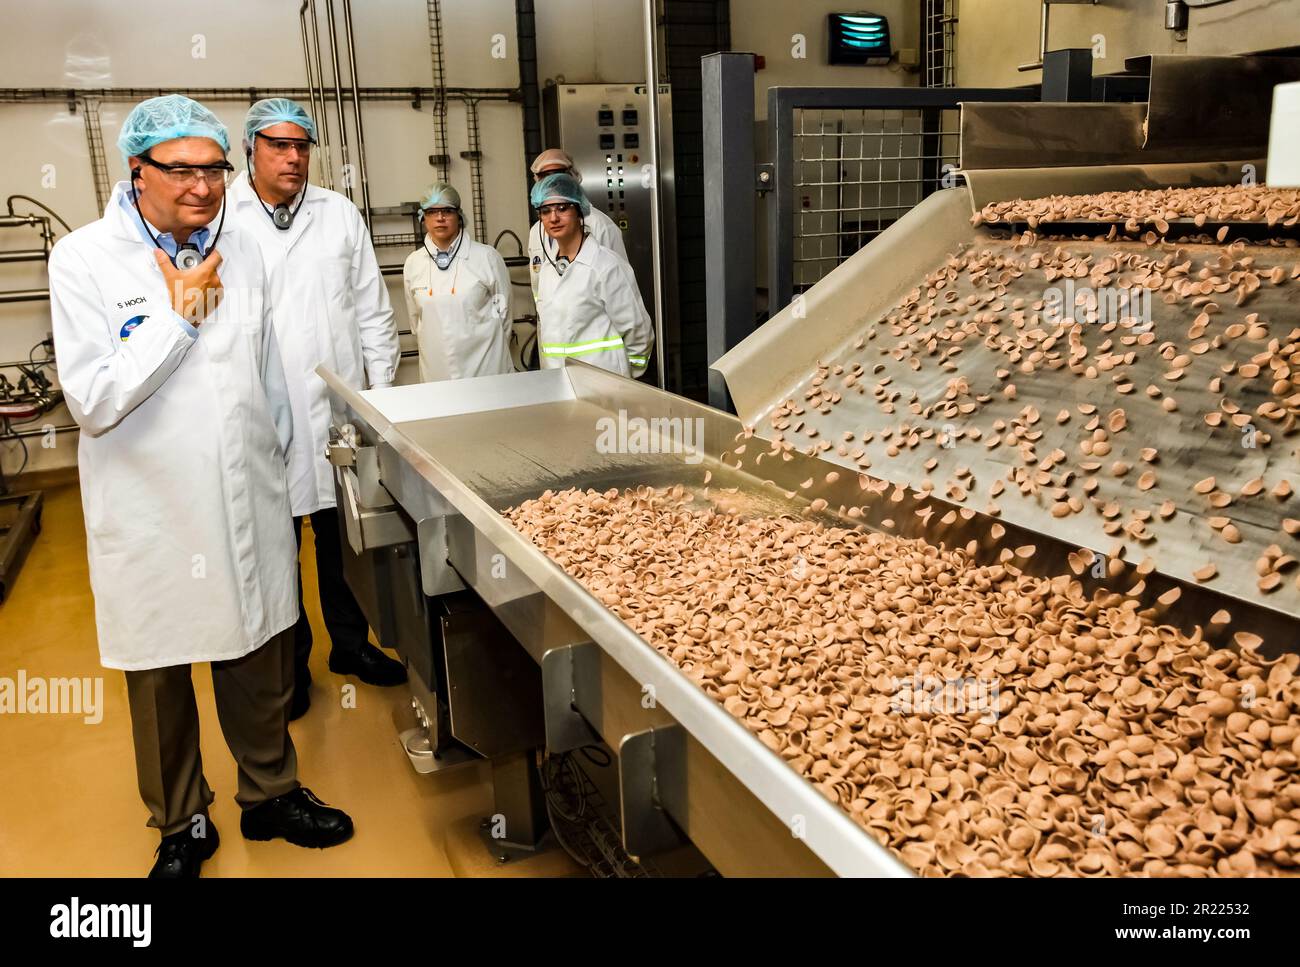 A group of manufacturing workers observing a production line in a chocolate factory Stock Photo